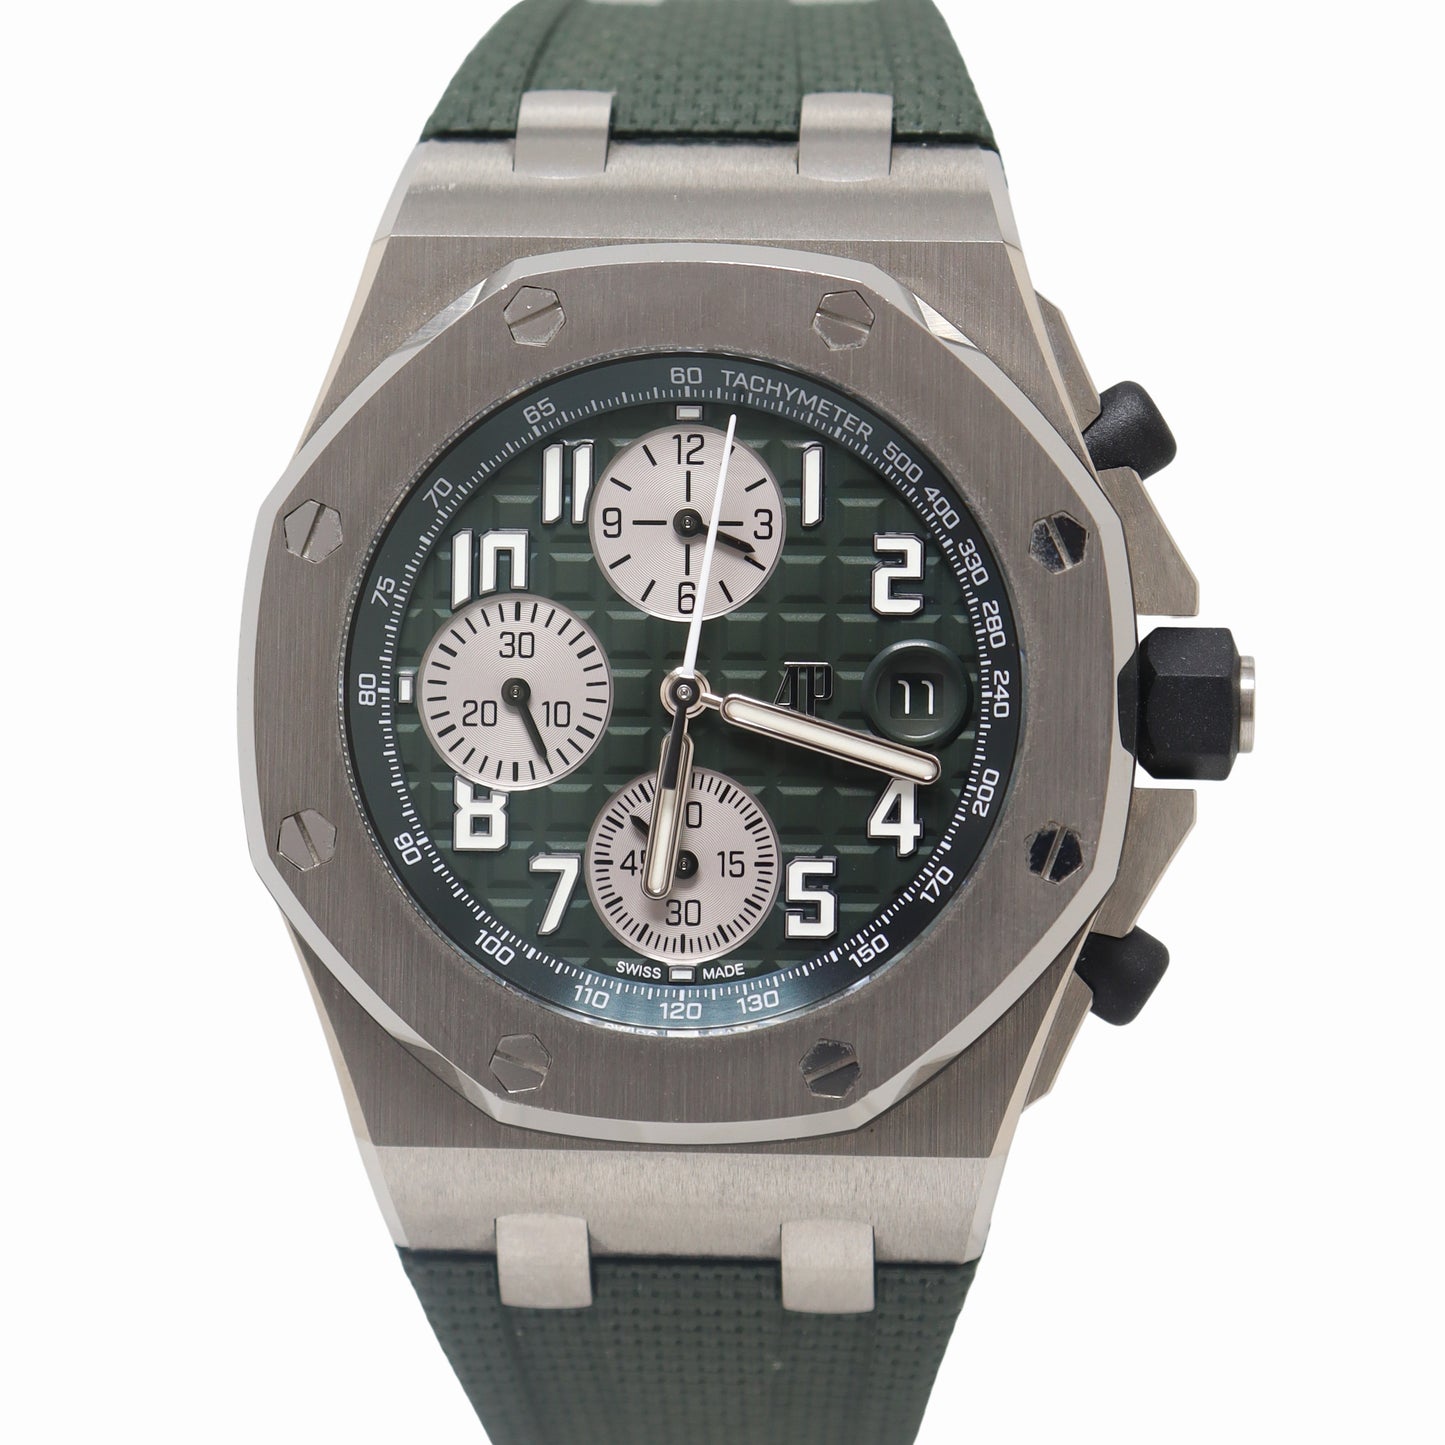 Audemars Piguet Royal Oak Offshore 42mm Khaki Green Chronograph Dial Watch Reference# 26238TI.OO.A056CA.01 - Happy Jewelers Fine Jewelry Lifetime Warranty